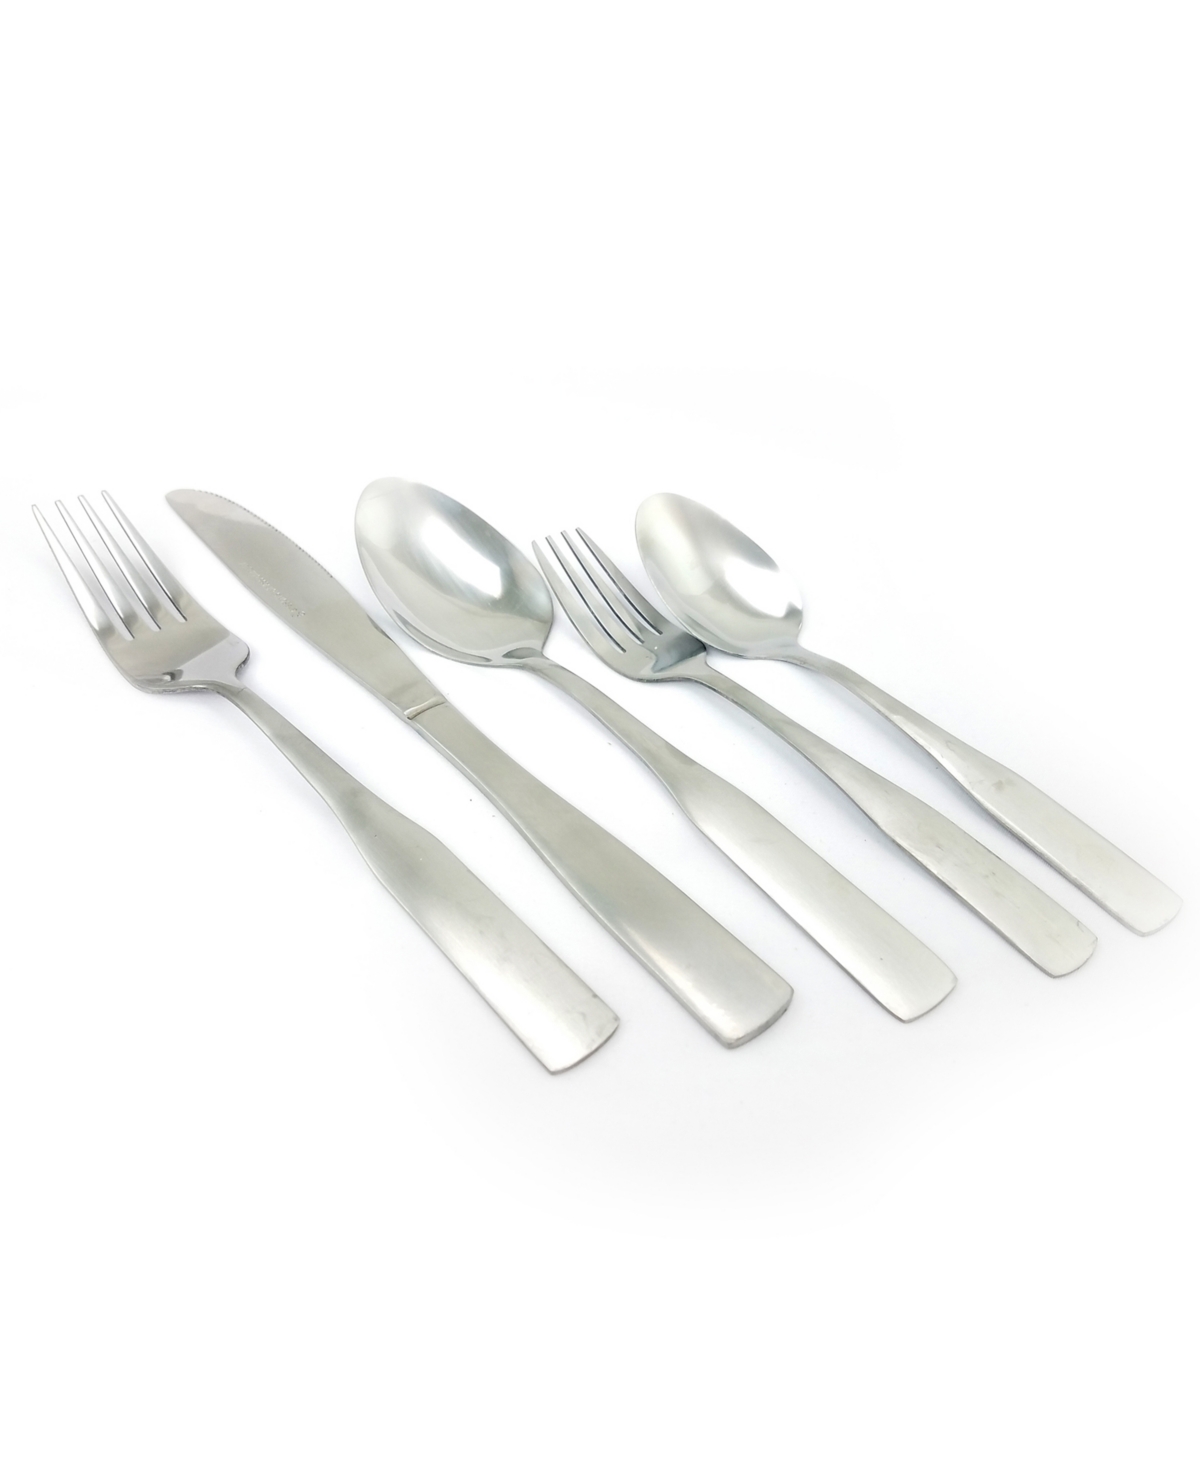 GIBSON HOME ABBEVILLE 61 PIECE FLATWARE SET WITH WIRE CADDY